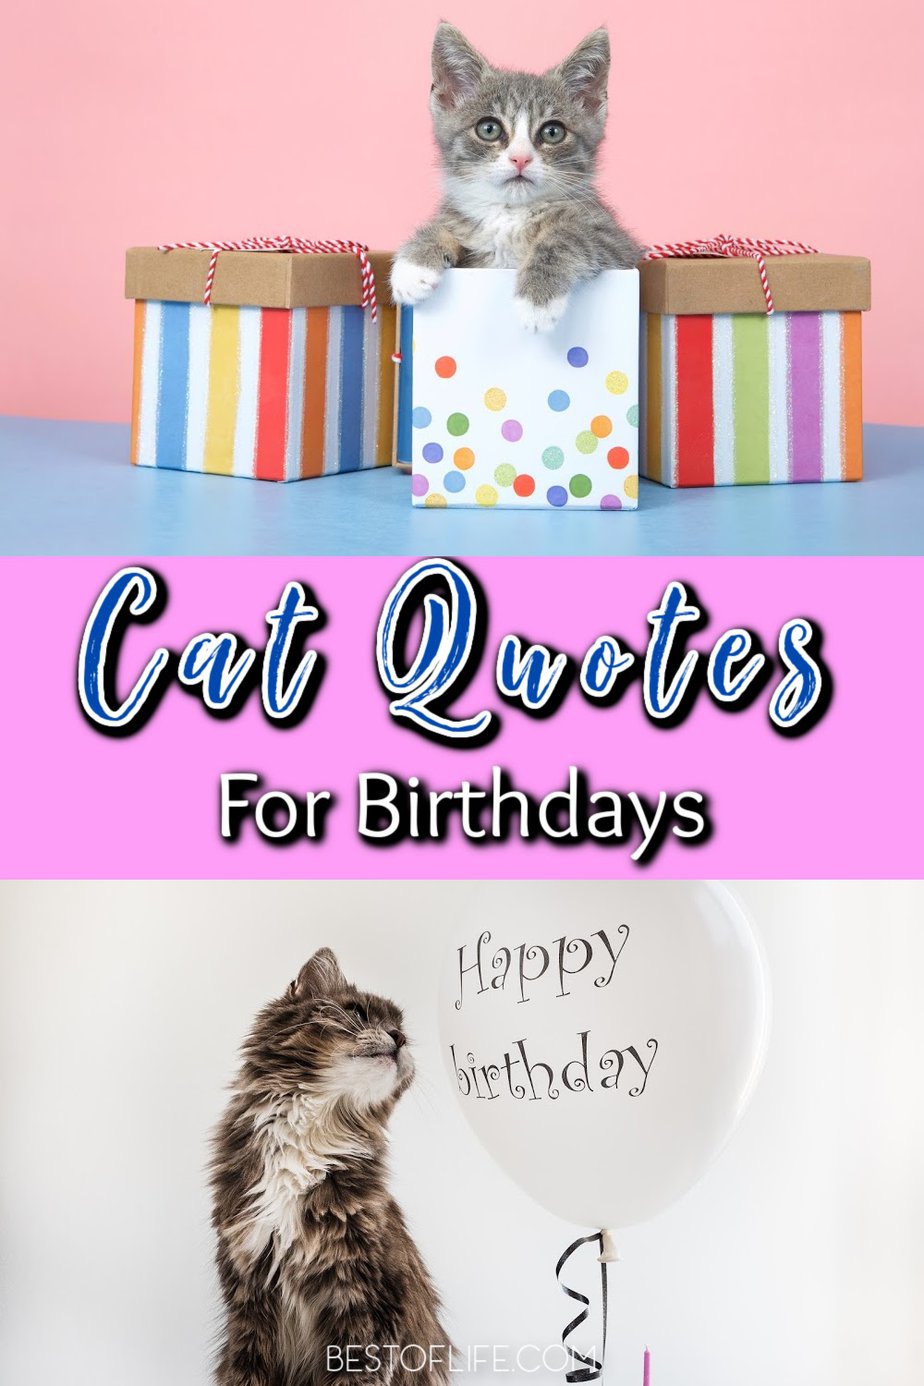 These fun cat quotes for birthdays are perfect for those who love their fur babies! Inspirational Cat Quotes | Funny Cat Quotes | Quotes About Cats | Quotes for Cat Lovers | Cat People Quotes | Birthday Quotes | Birthday Wishes #cats #birthday